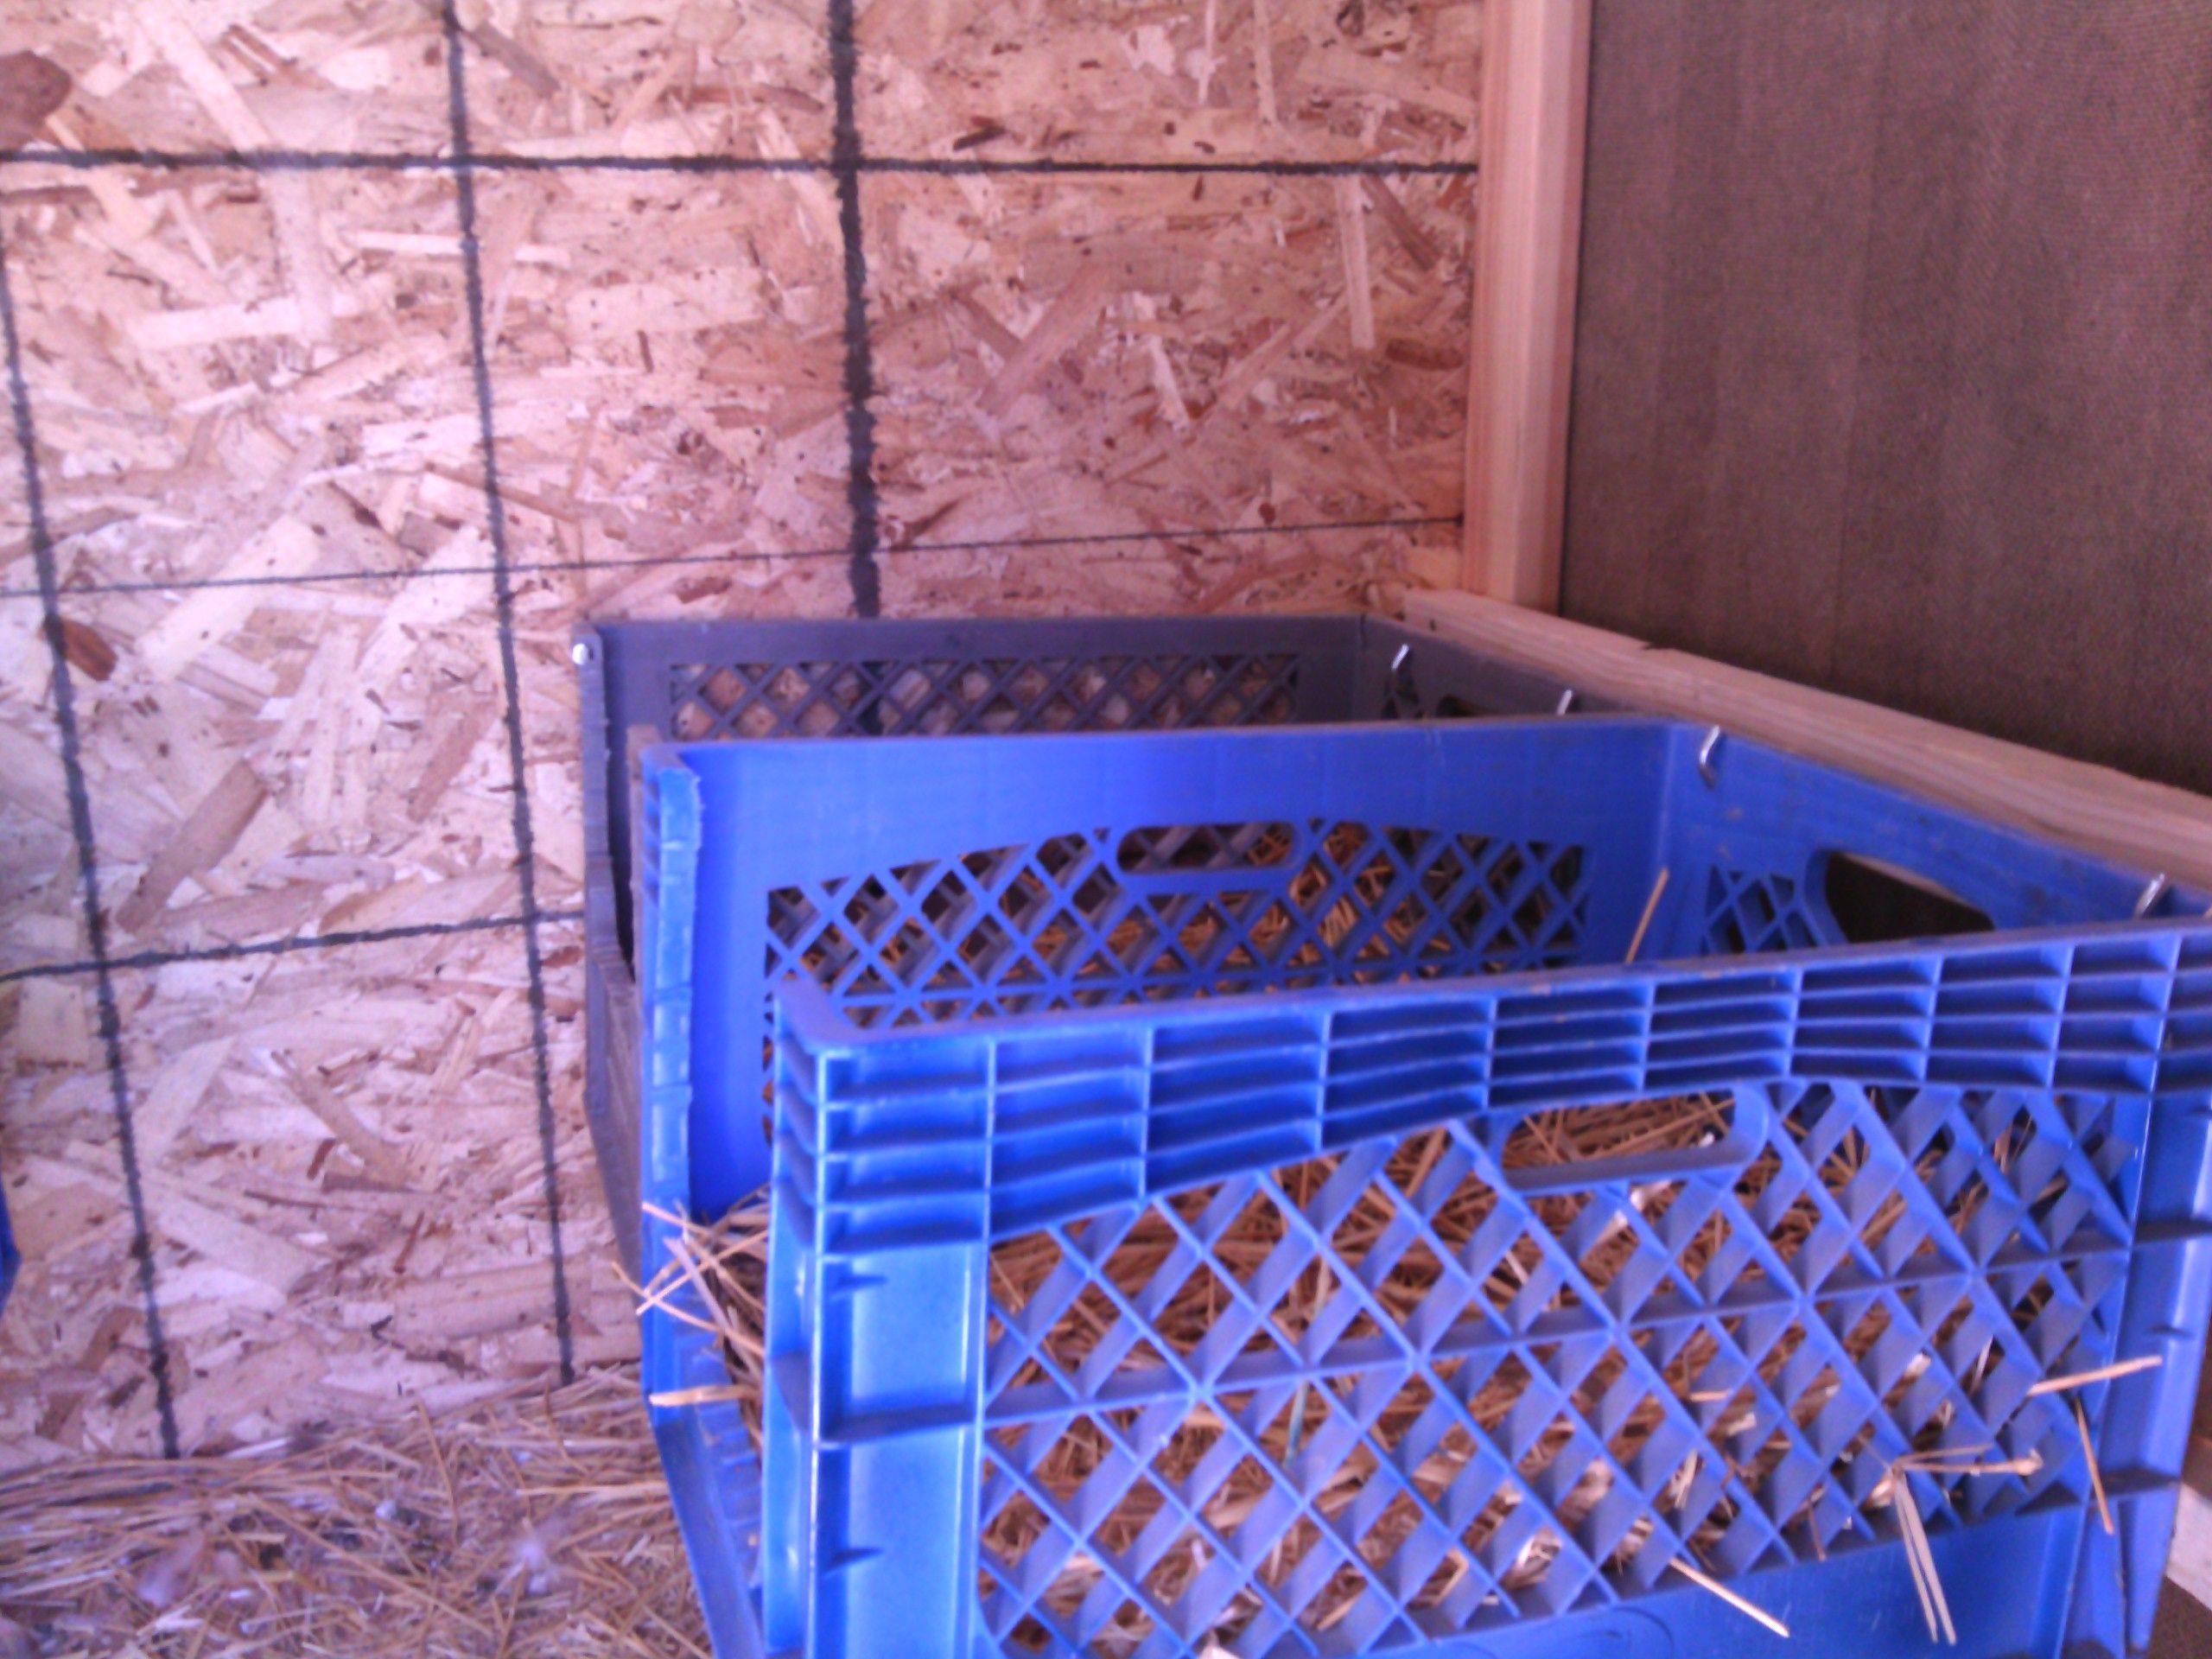 old milk crates make great nesting boxes